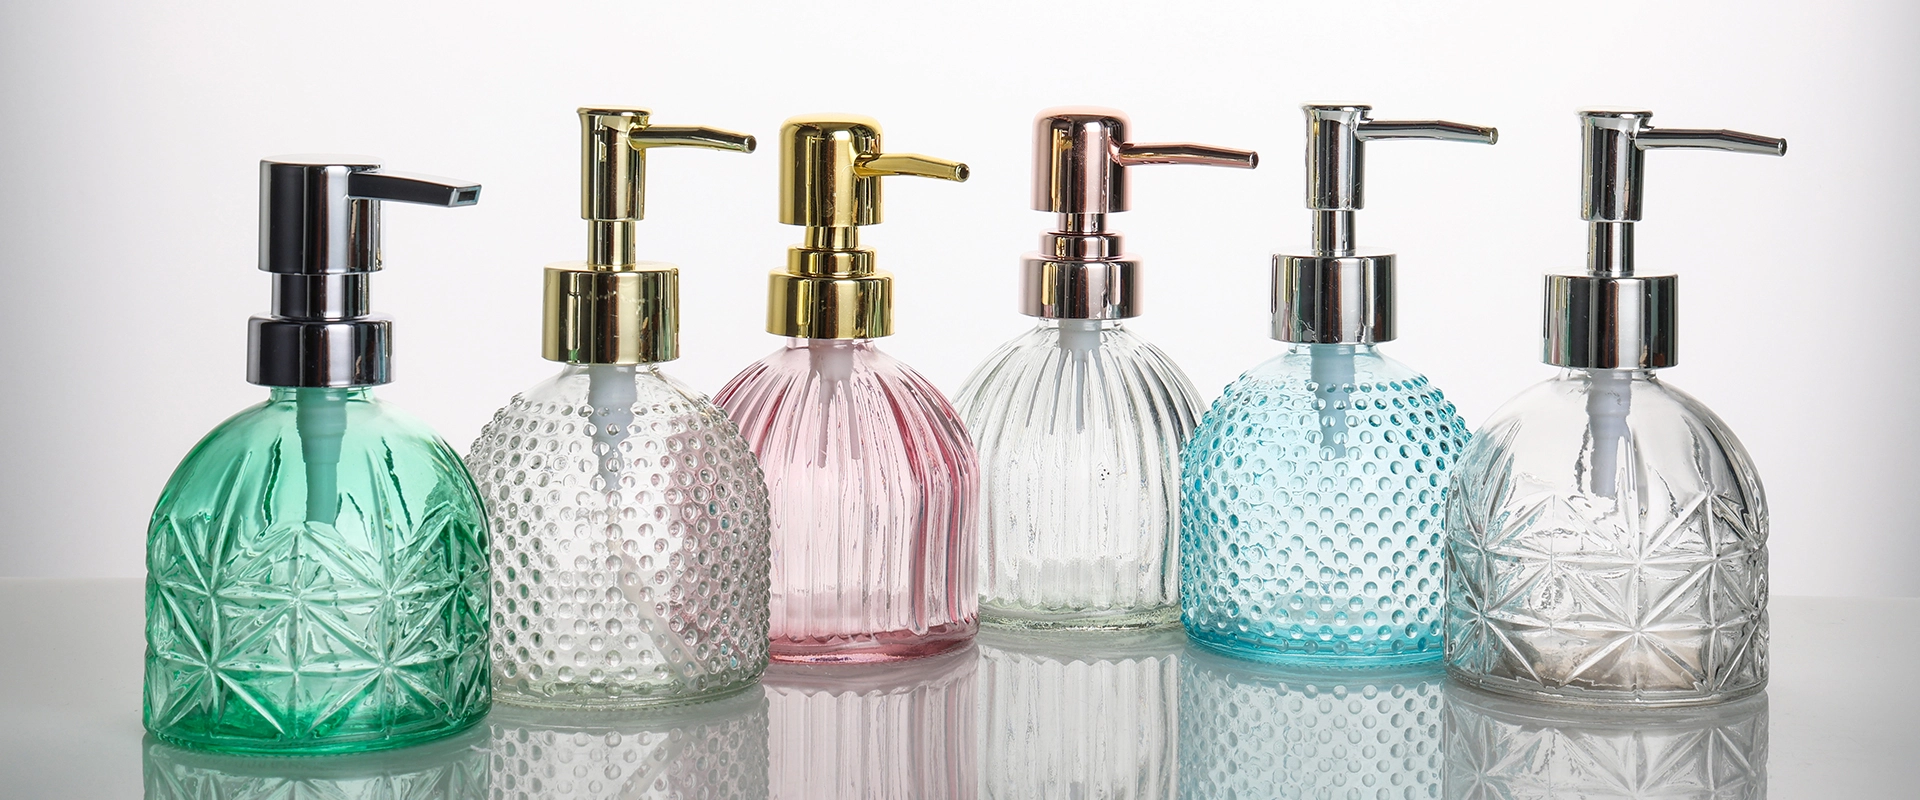 How Should Glass Perfume Bottles Be Stored To Maintain Fragrance Quality?